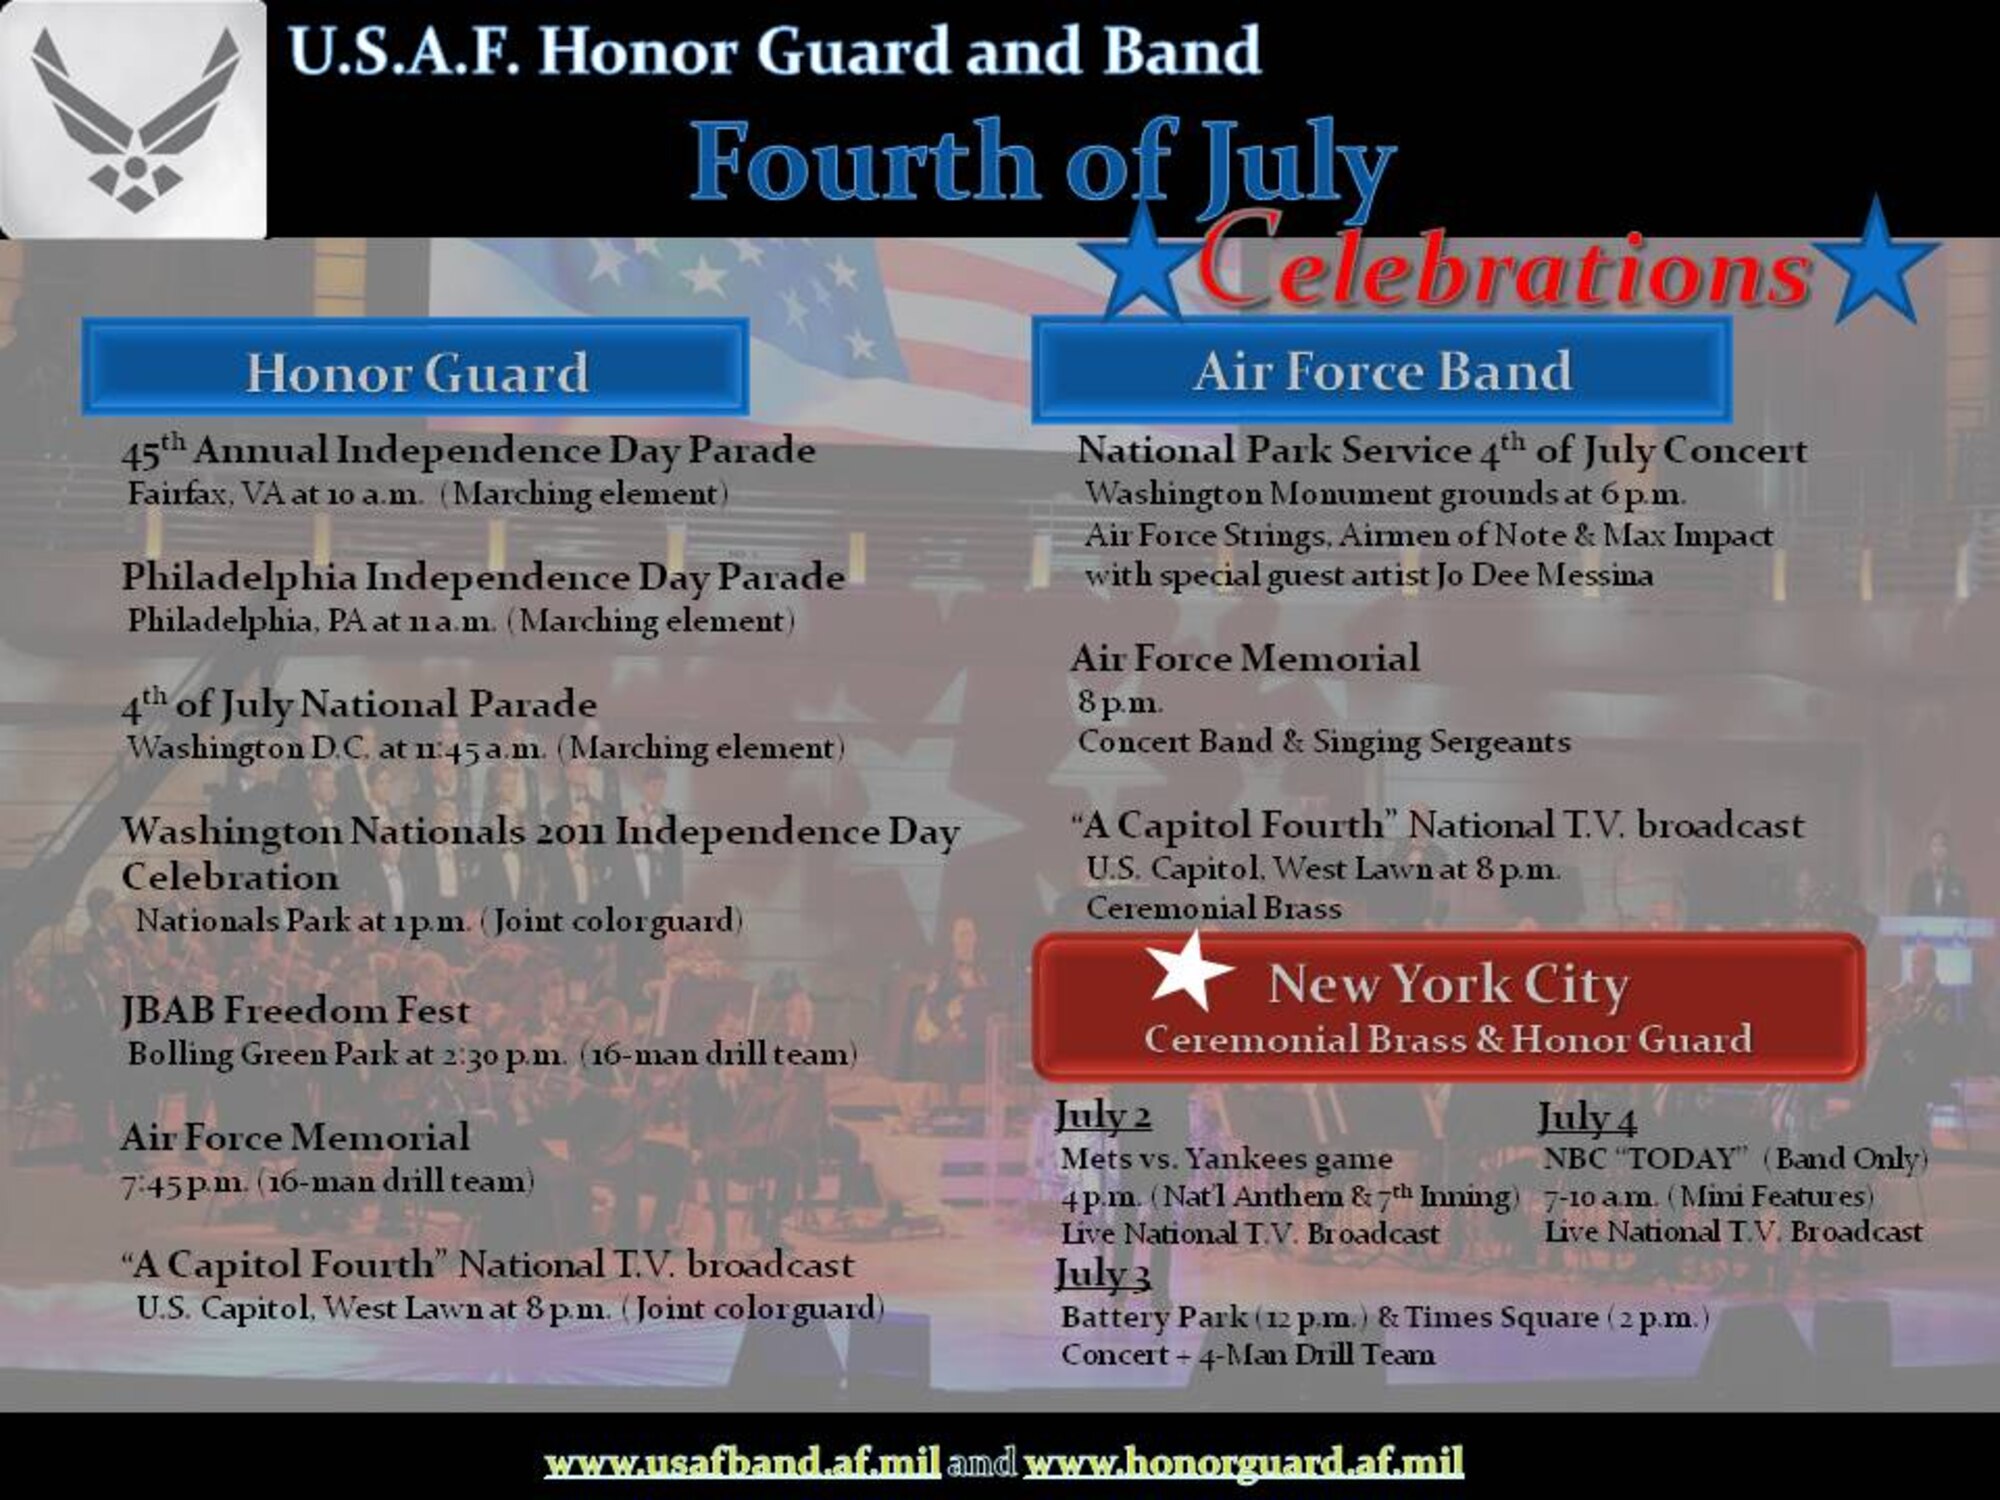 The U.S. Air Force Honor Guard and U.S. Air Force Band will be celebrating the 2011 Independence Day in various performances on the East coast. 